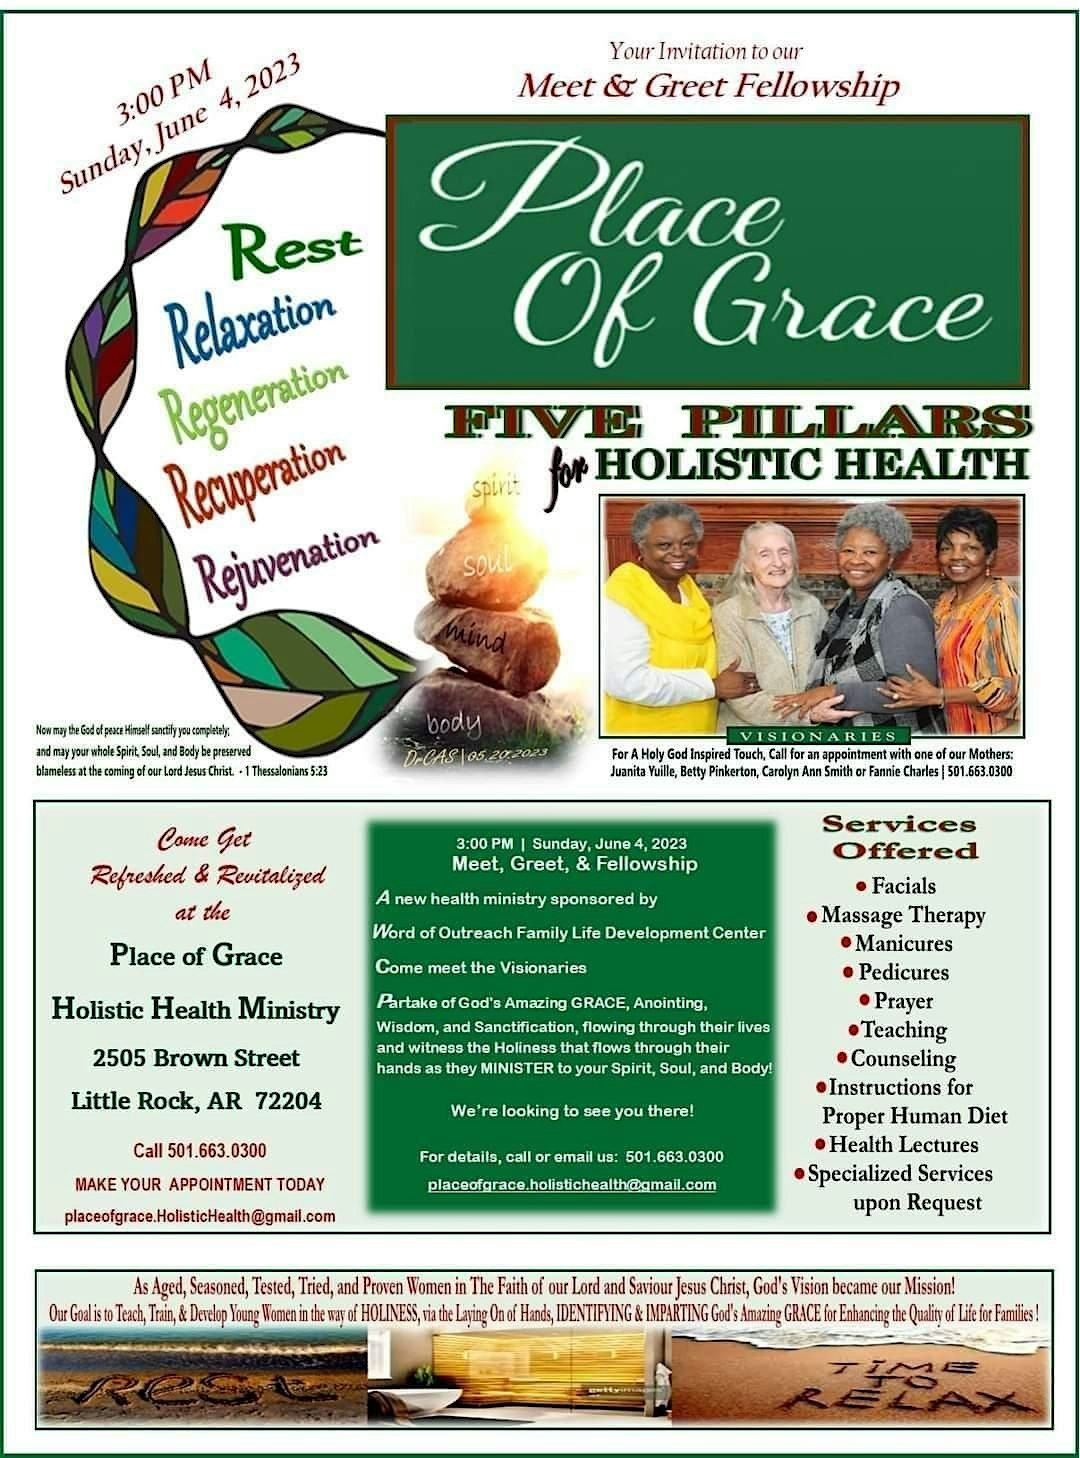 43rd YEAR CELEBRATION & OPEN HOUSE of A NEW UNIQUE MINISTRY